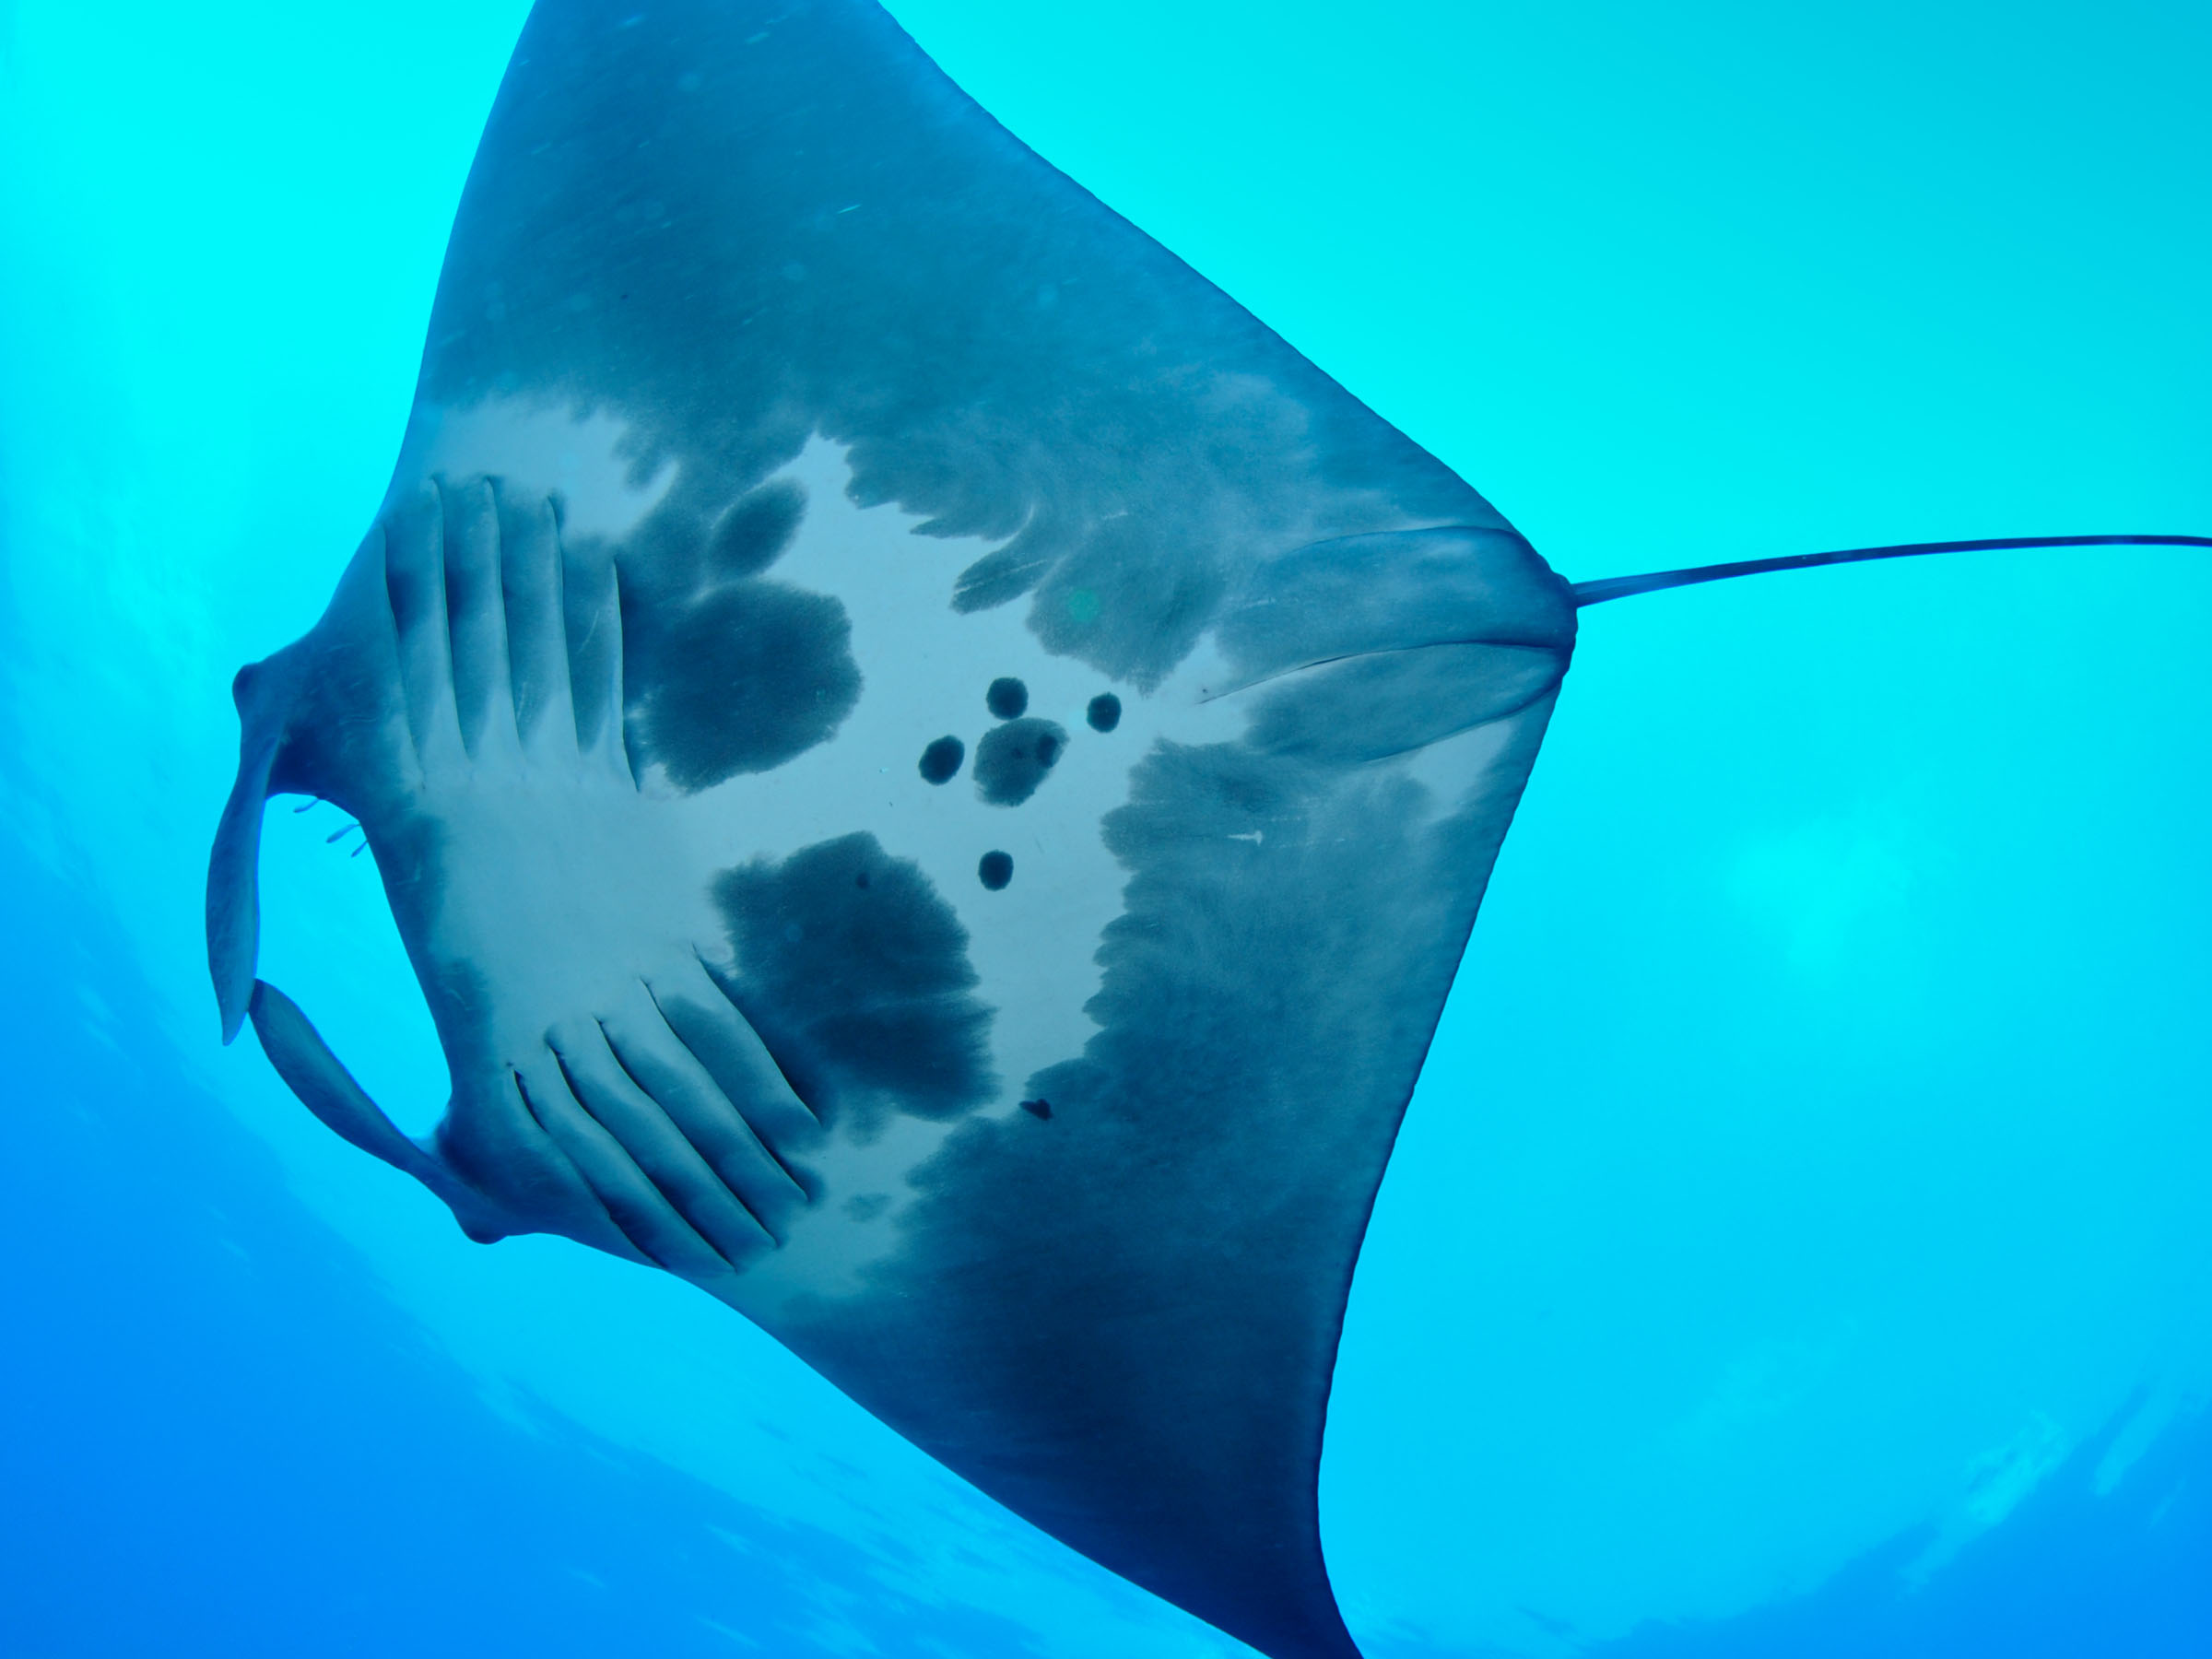 Manta Rays are frequent visitors to Flower Garden Banks National Marine sanctuary in the northwestern Gulf of Mexico. Each individual has a unique spot pattern of black and white on its underside, and over 80 mantas have been identified within the sanctuary. NOAA, G.P. Schmahl